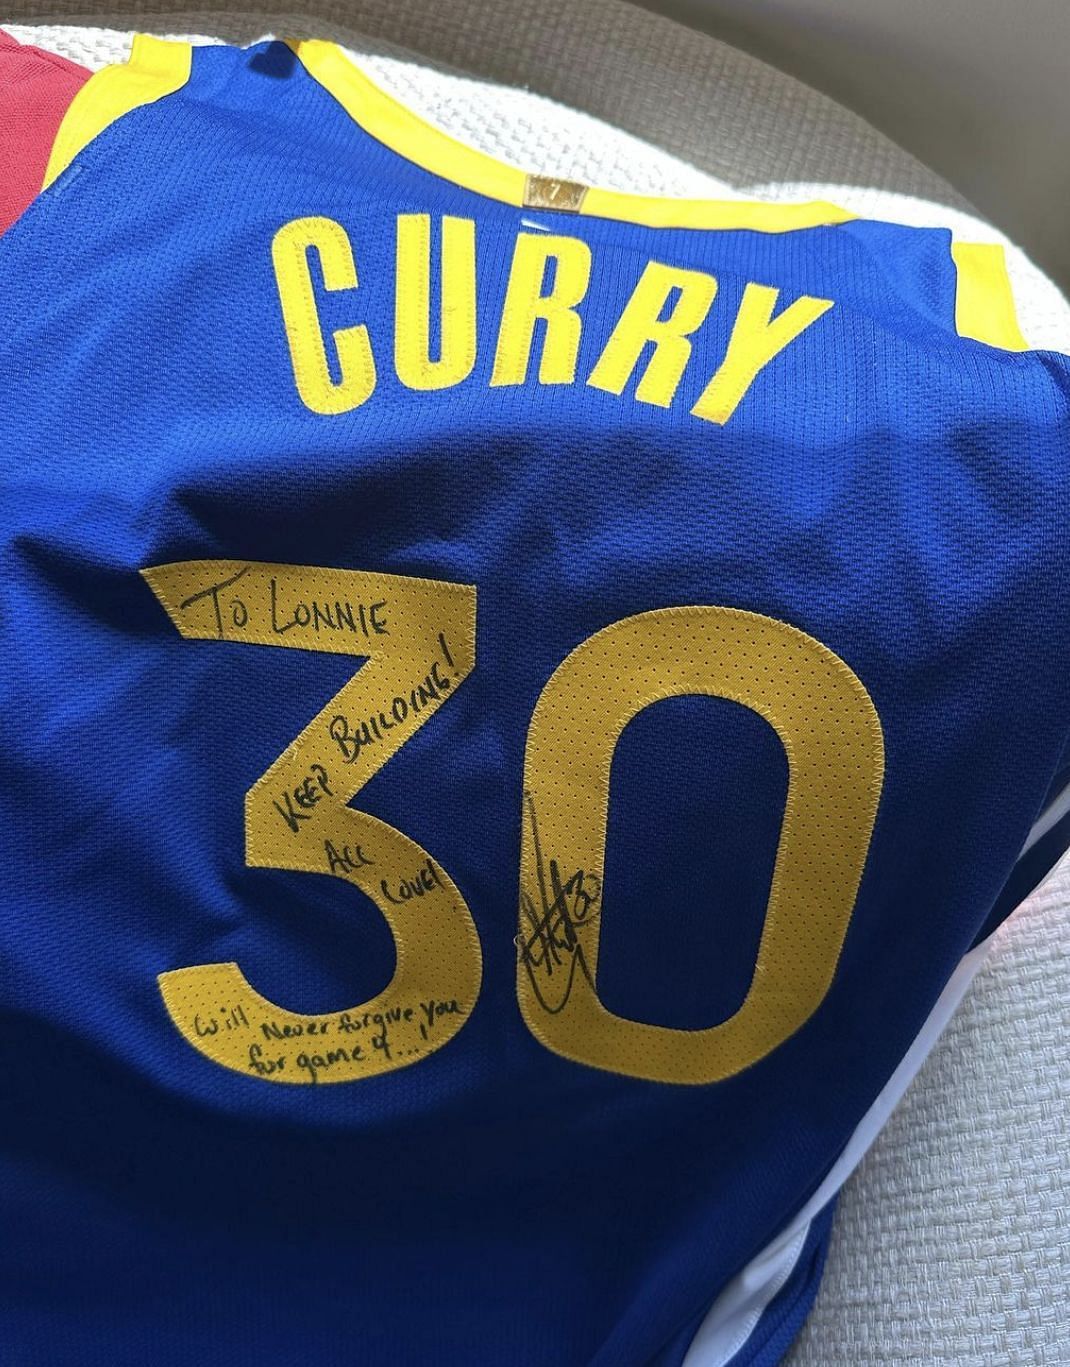 Steph Curry signed a jersey for Lonnie Walker